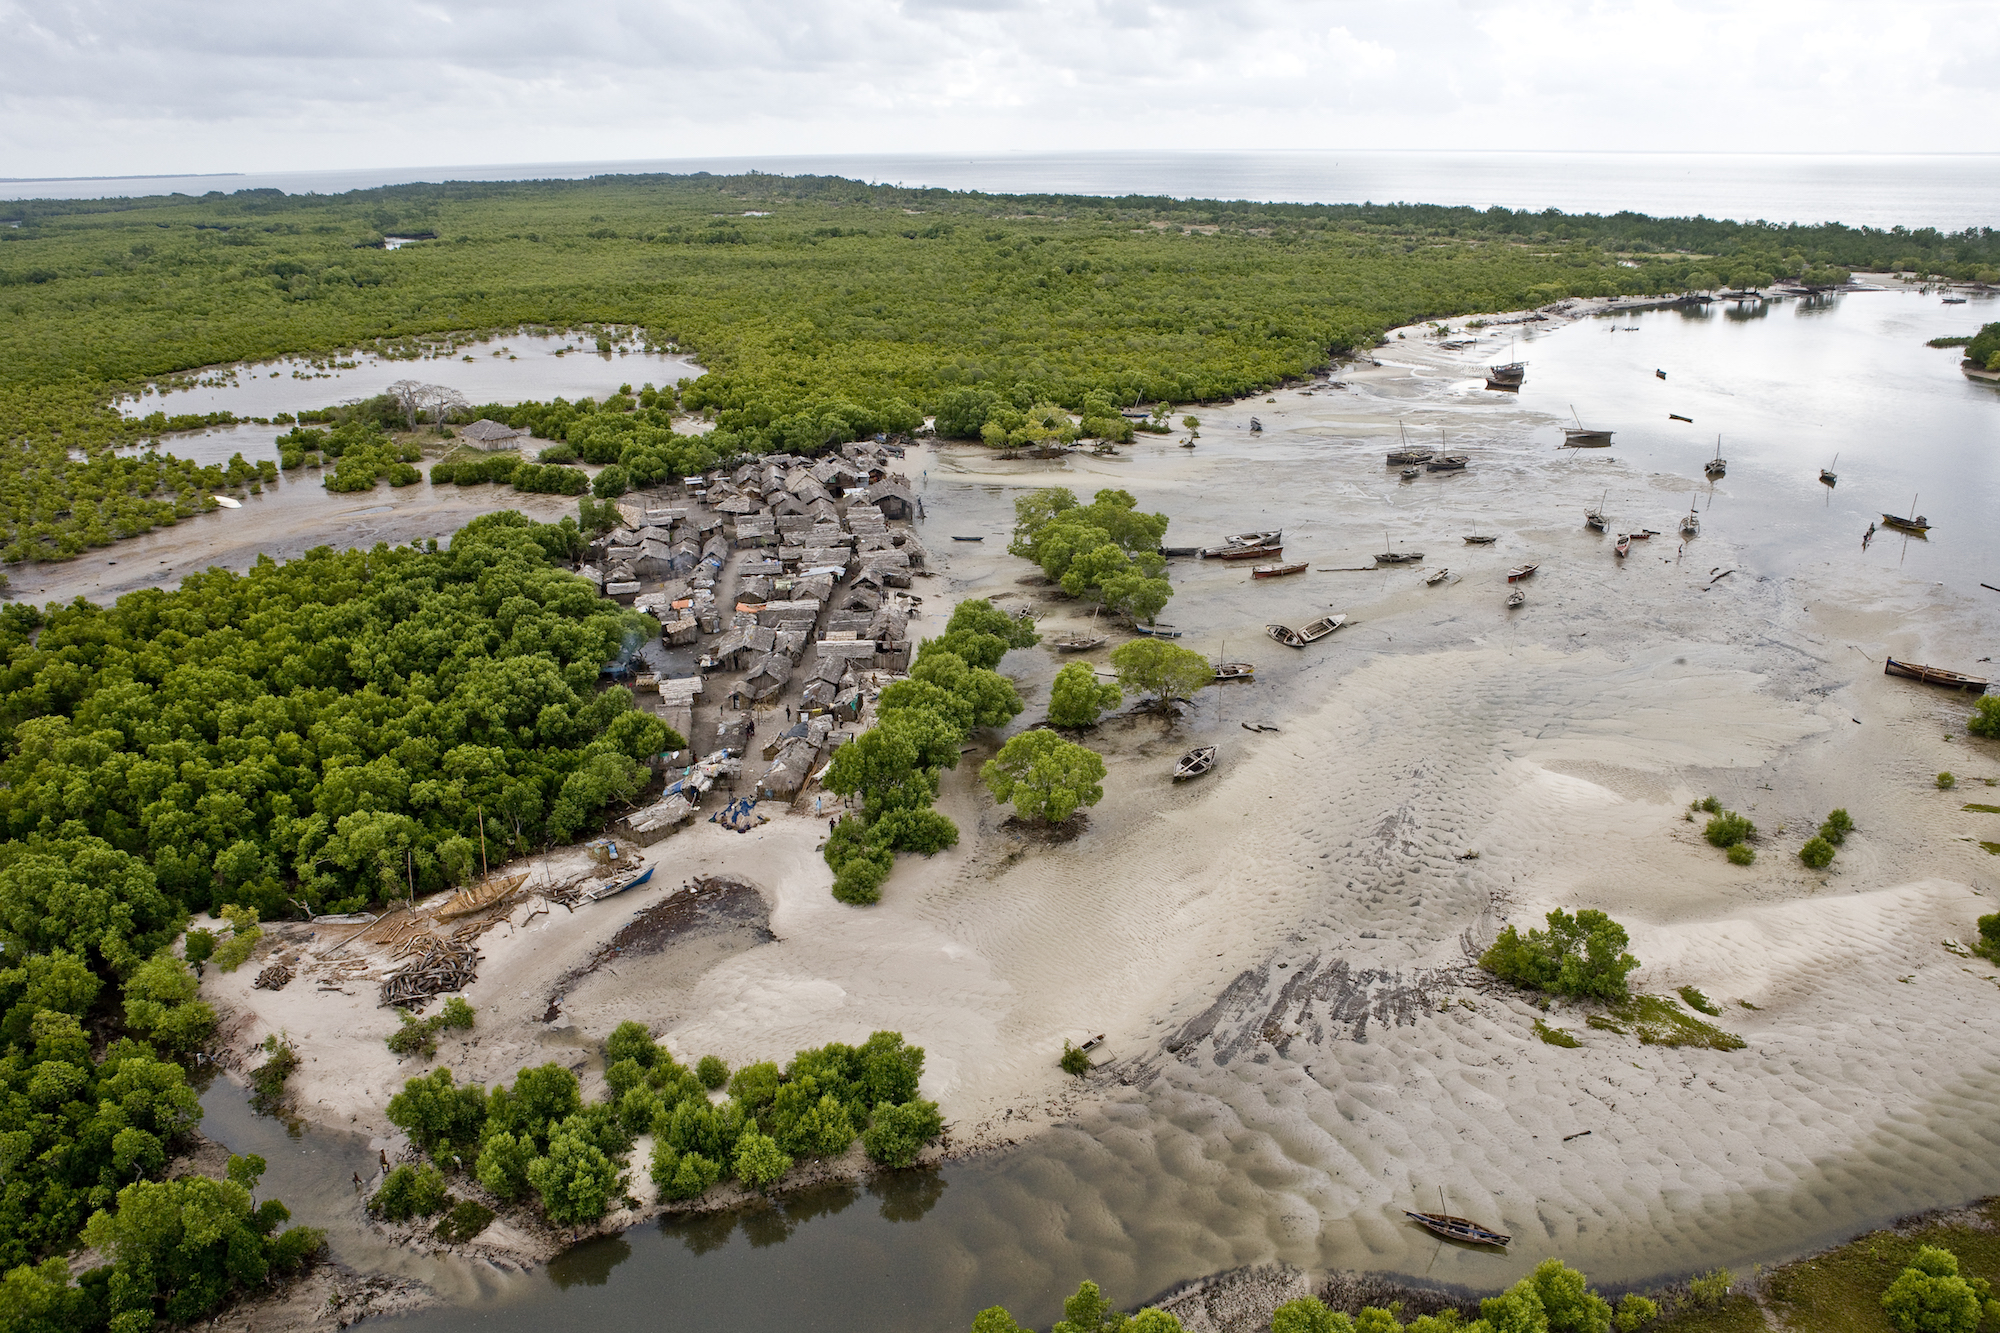 Aerial view of the Sufiji river, in Africa